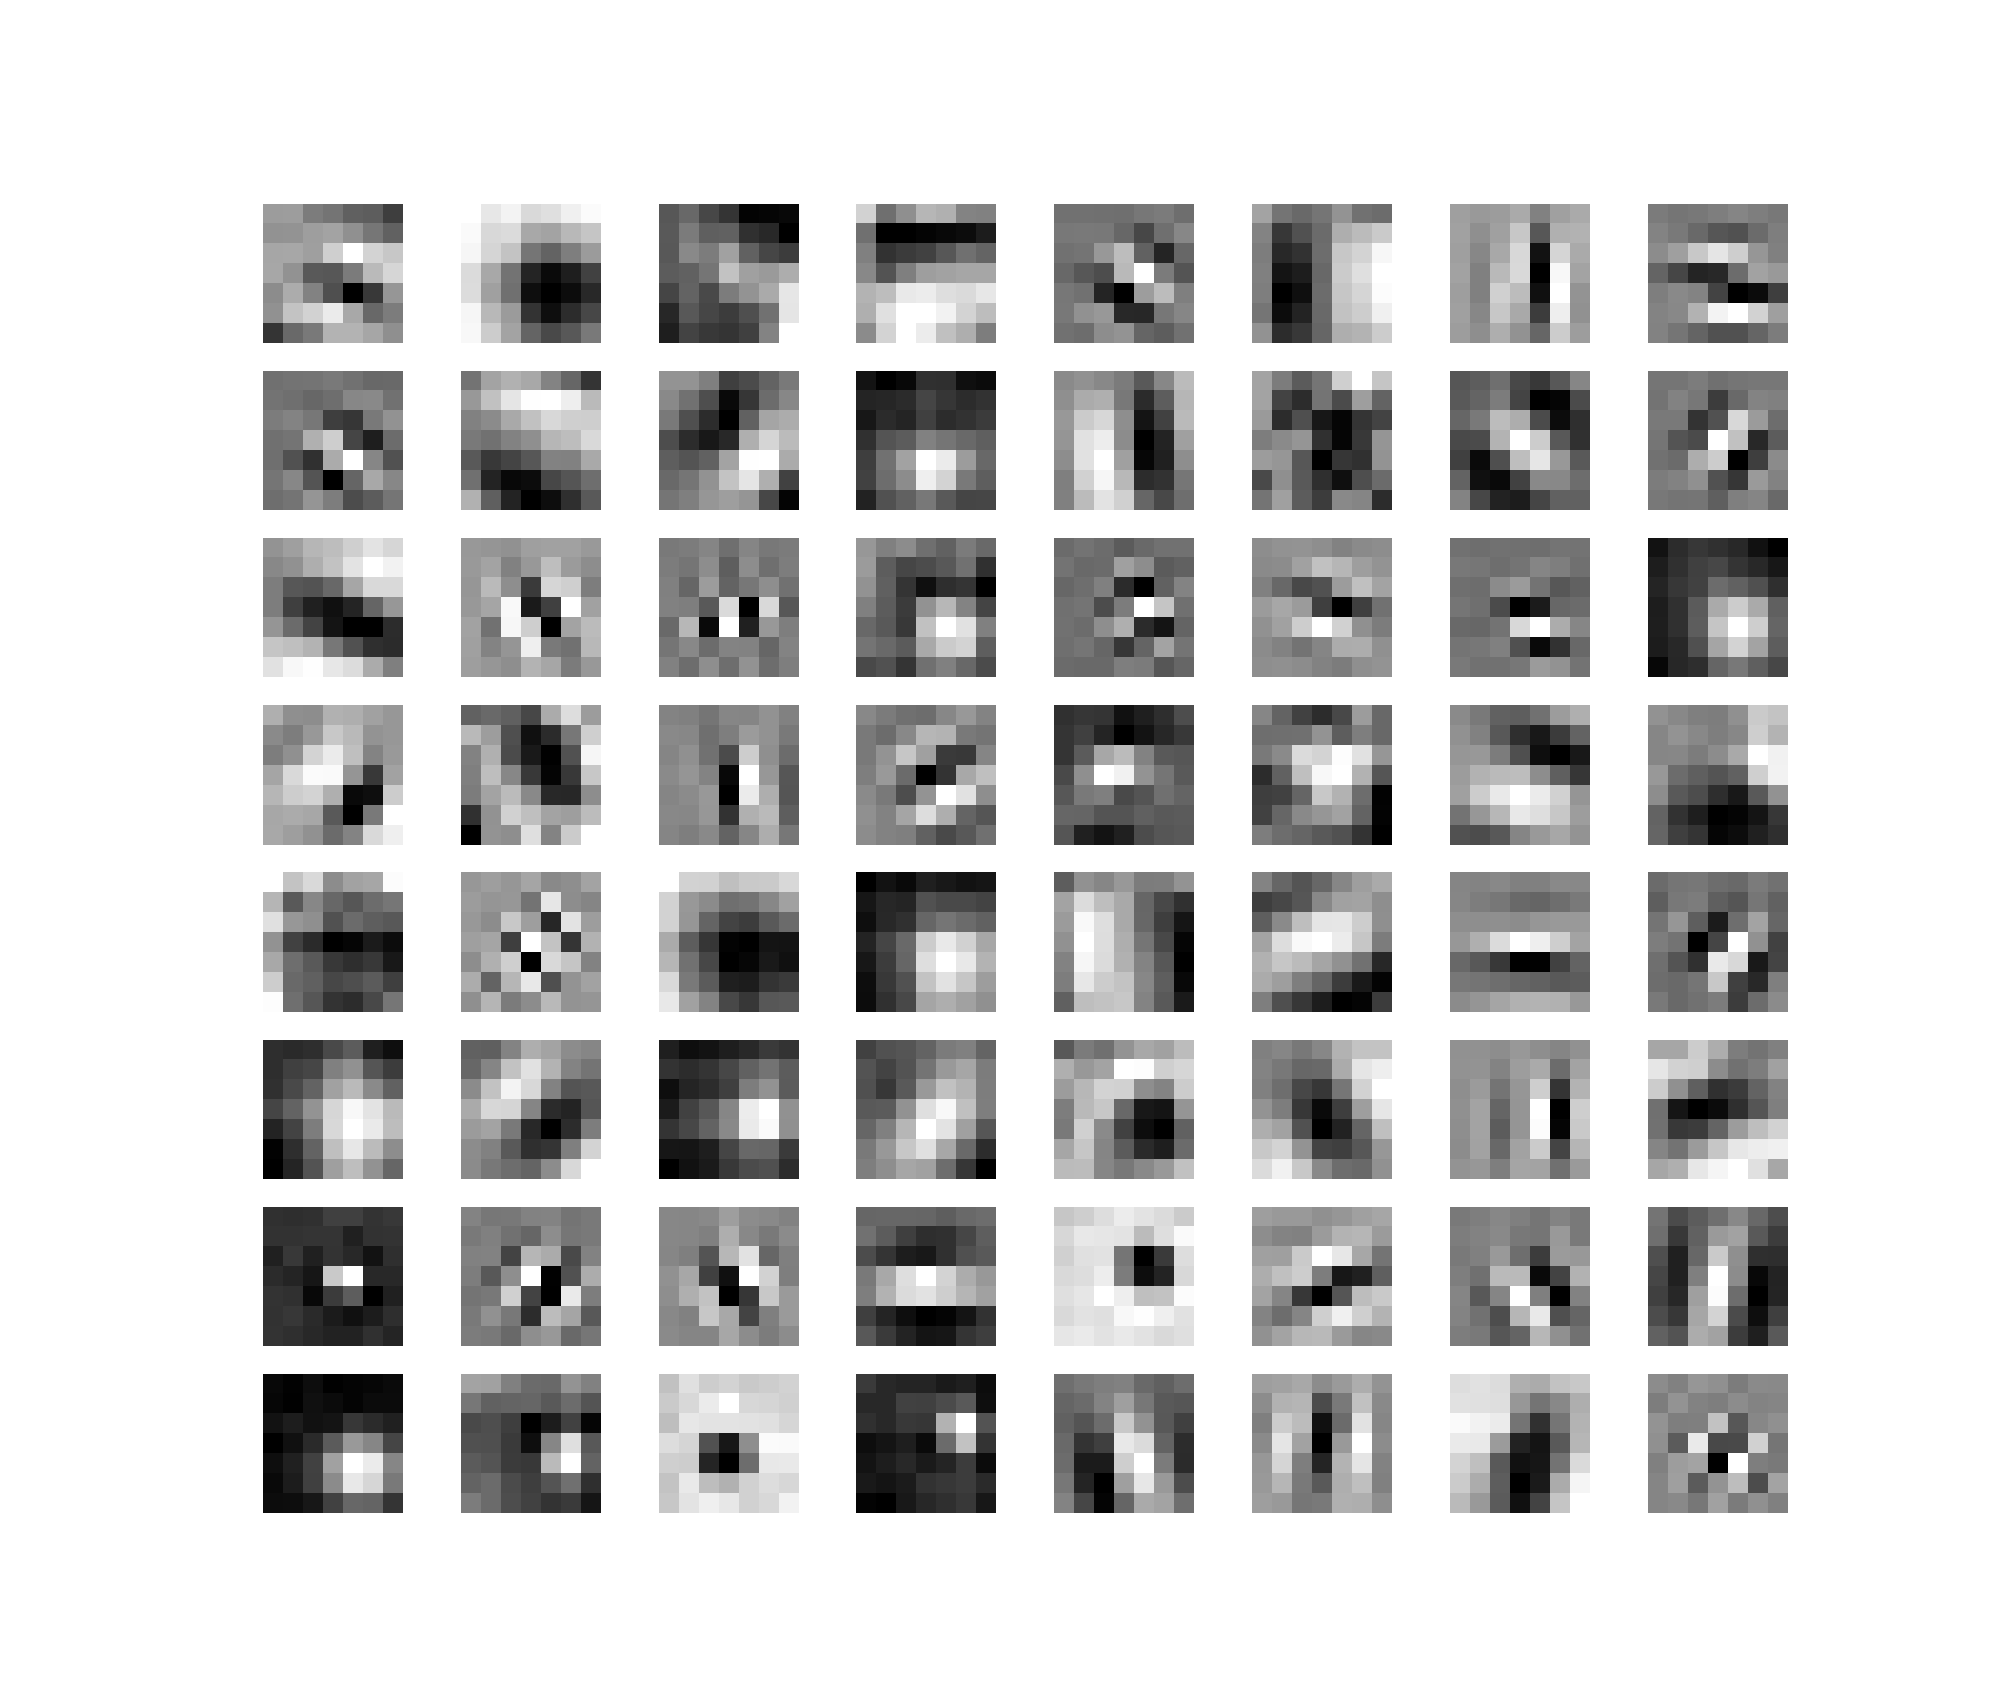 First convolutional layer filter of the ResNet-50 neural network model